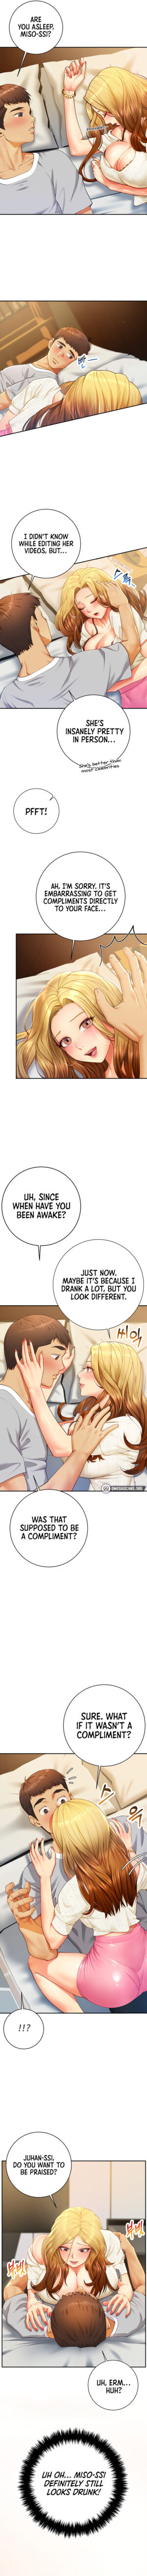 [Peep Show & DongA Writer] Like and Subscribe (1-17) [English] [Omega Scans] [Ongoing]